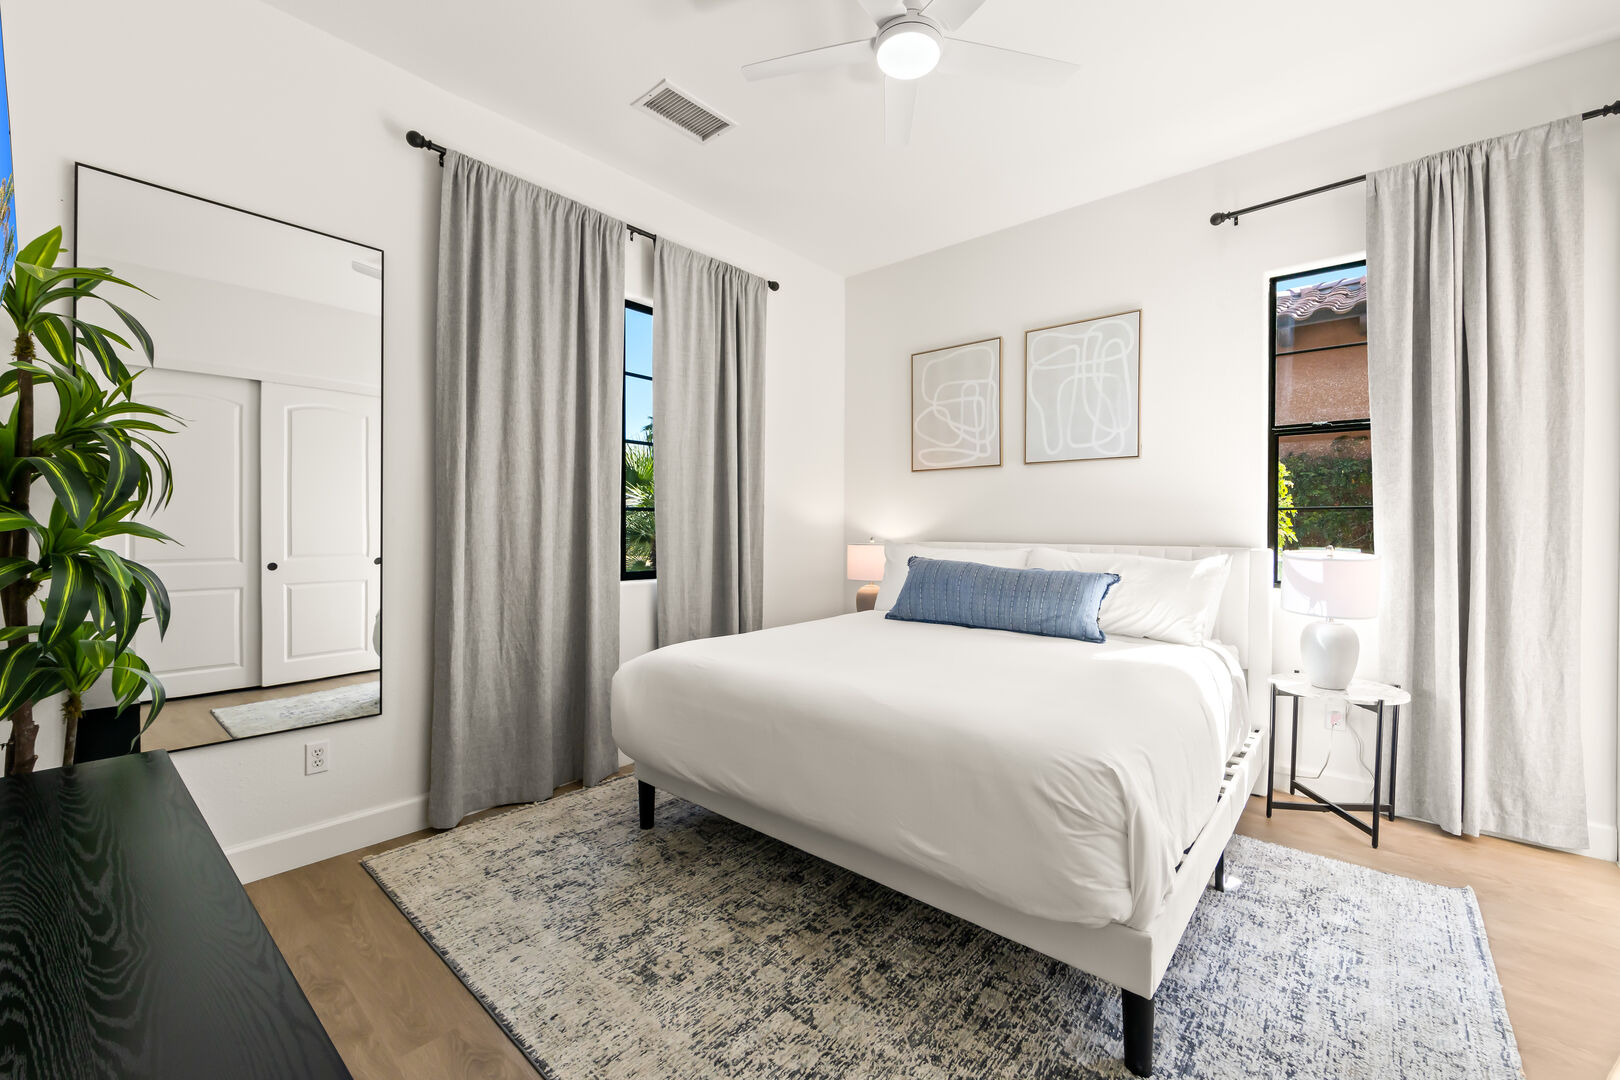 With private access to and from the courtyard, this bedroom offers both comfort and convenience for those seeking more privacy.